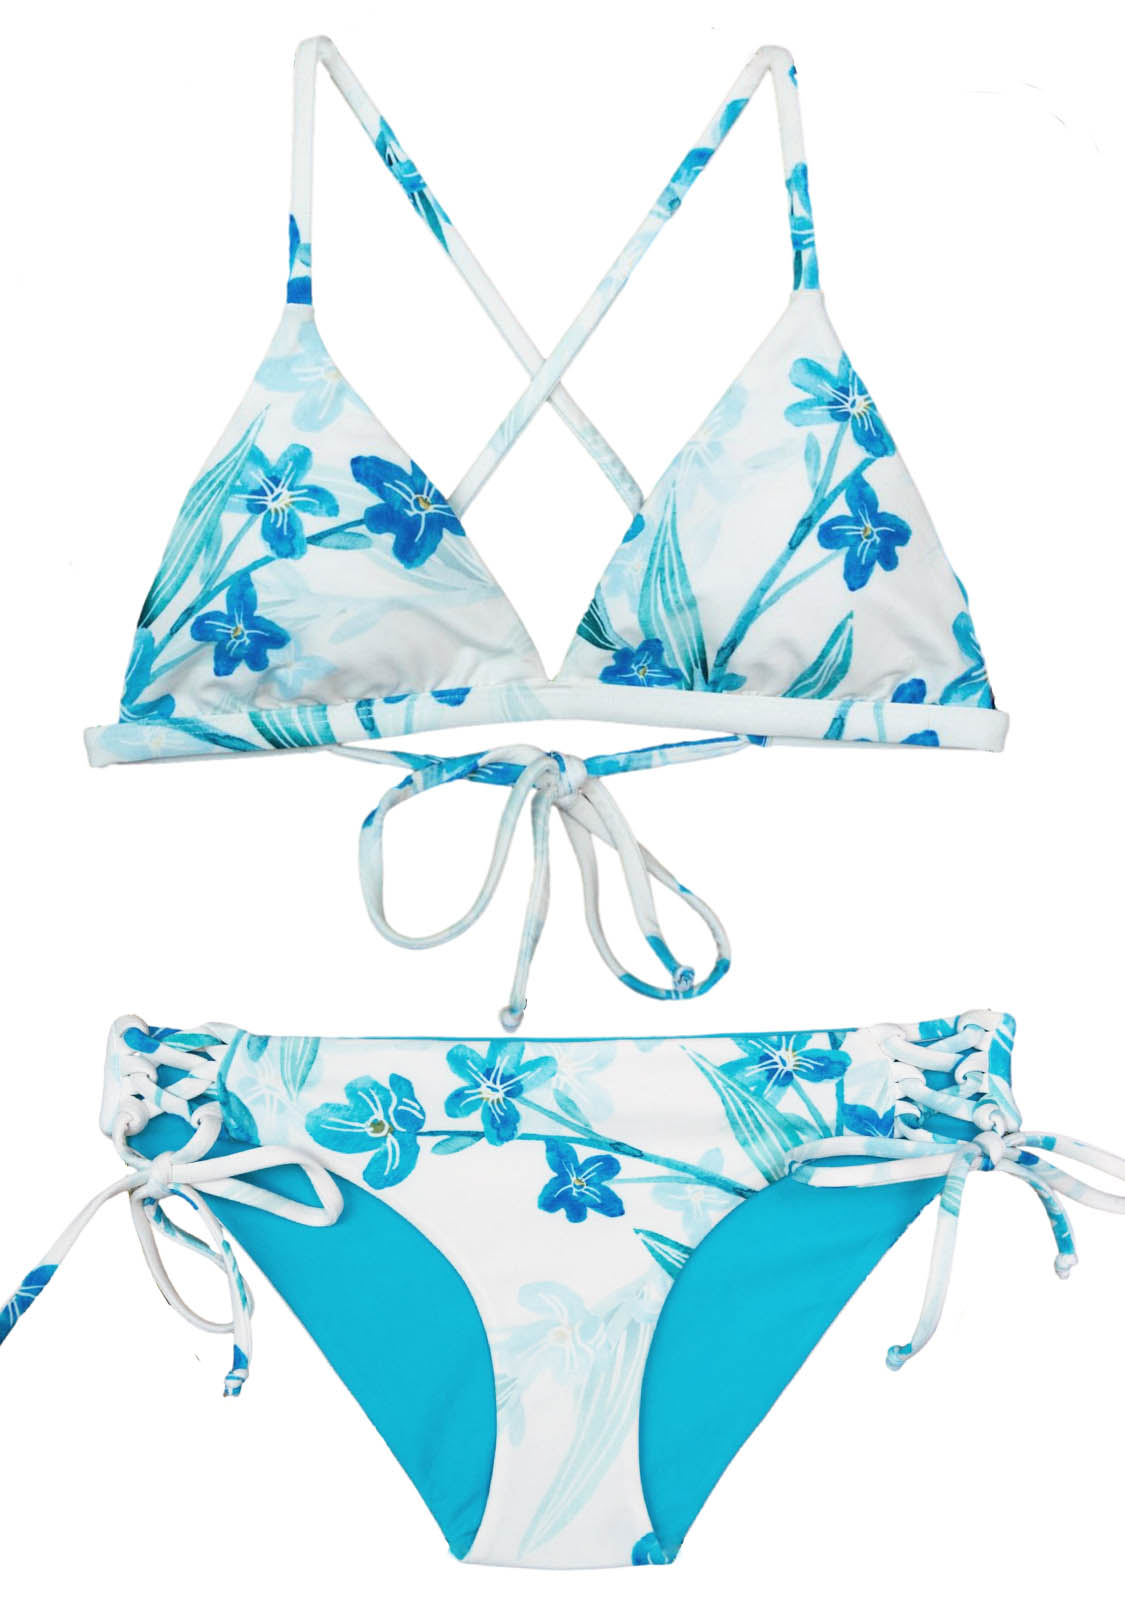 Reversible Junior Girls 2-Piece Bikini with hand painted floral print, a triangle top and matching bottoms